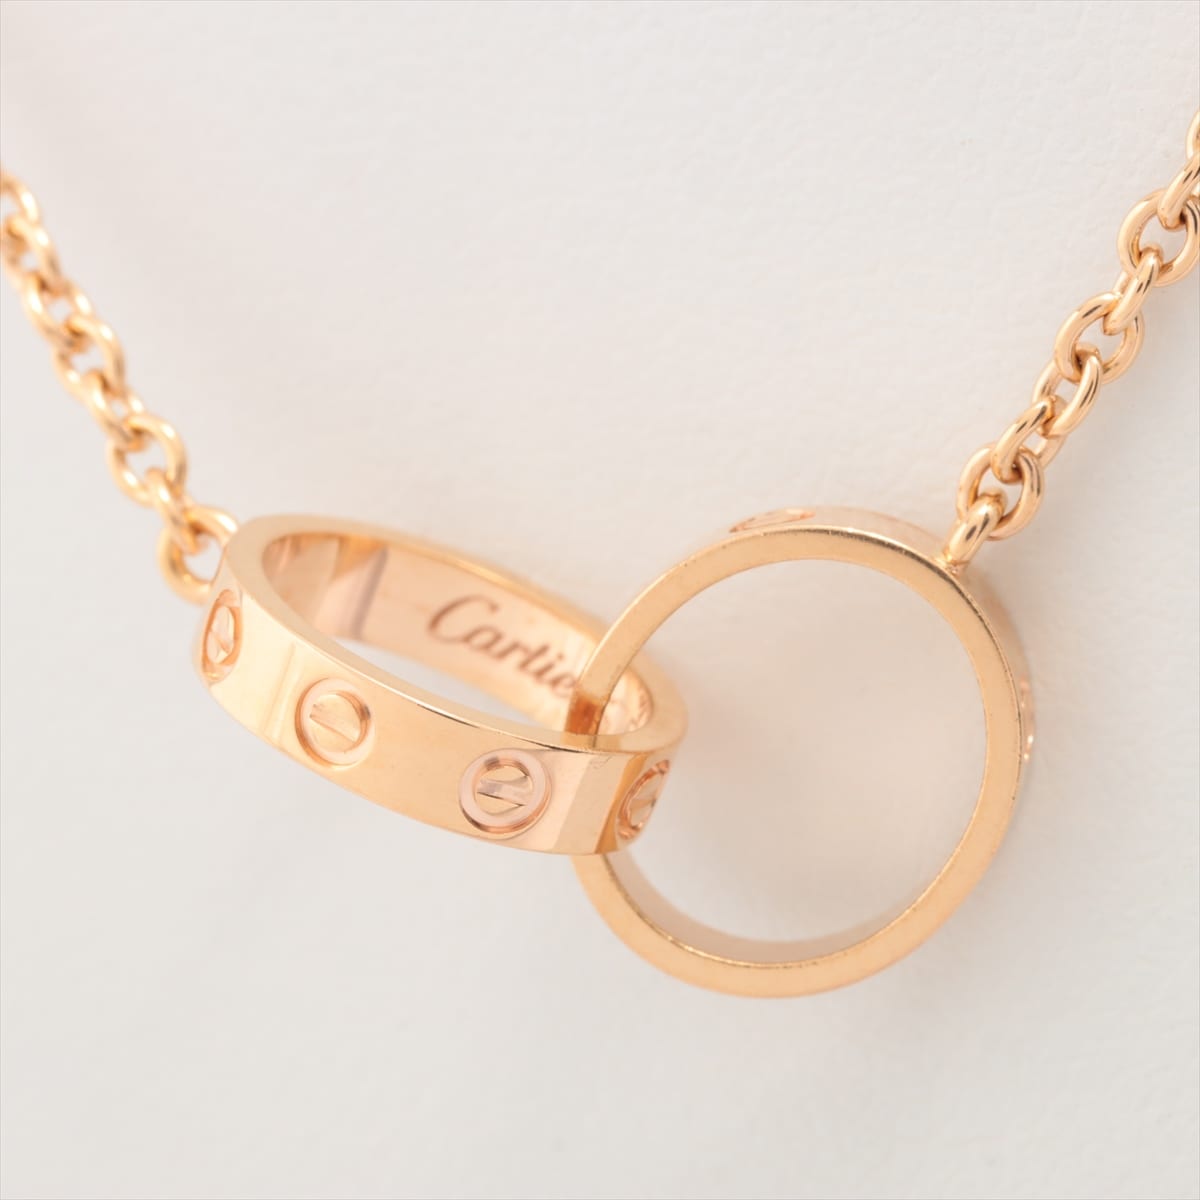 Cartier Baby Love Necklace 750(PG) 6.6g